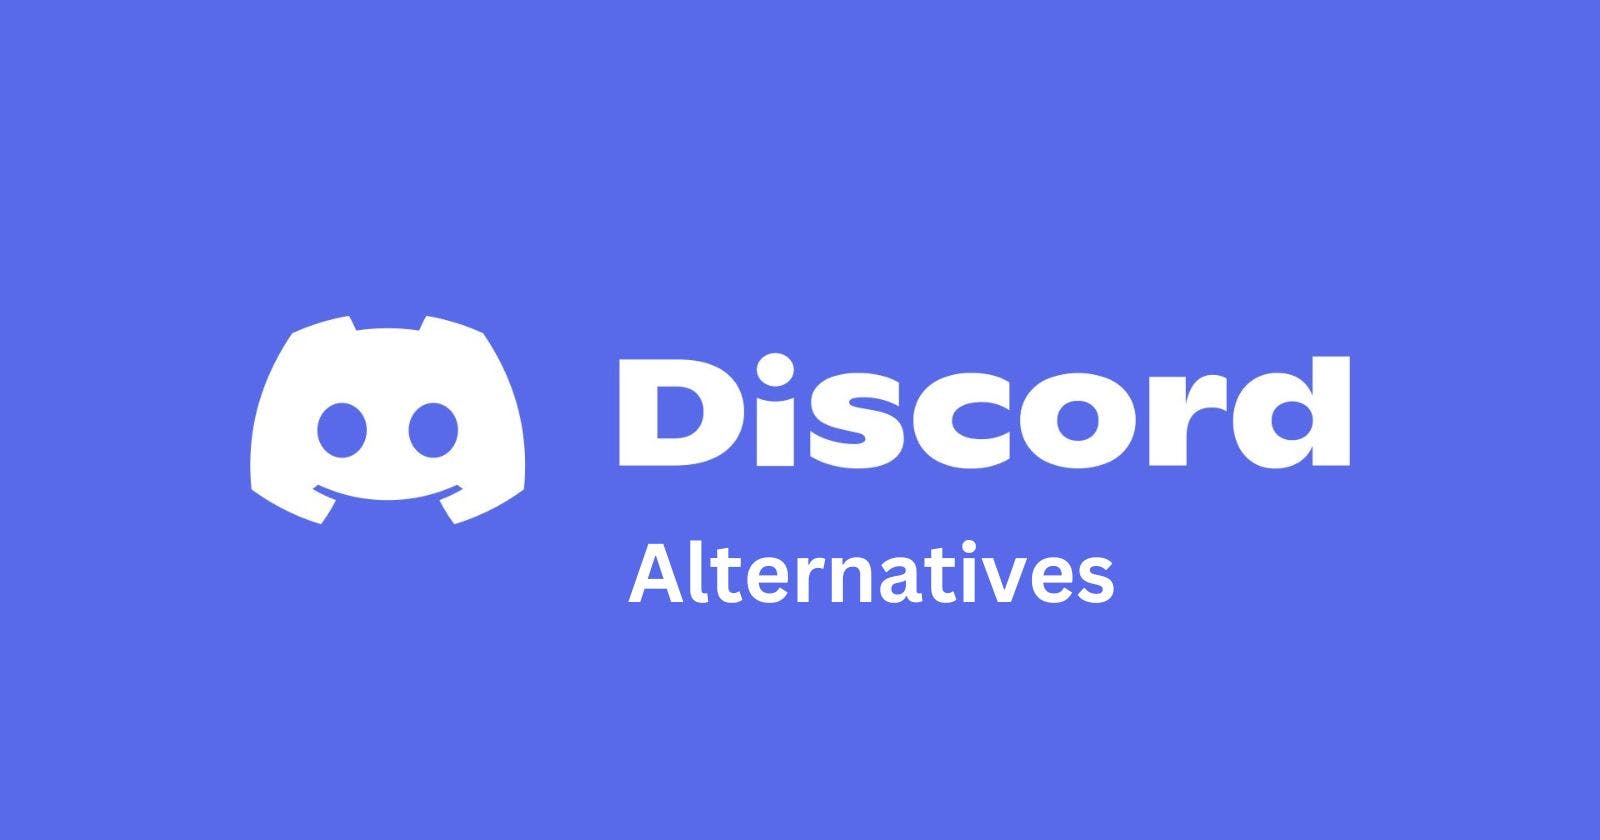 Seeking Solid Alternatives to Discord? Here Are Some Options to Consider